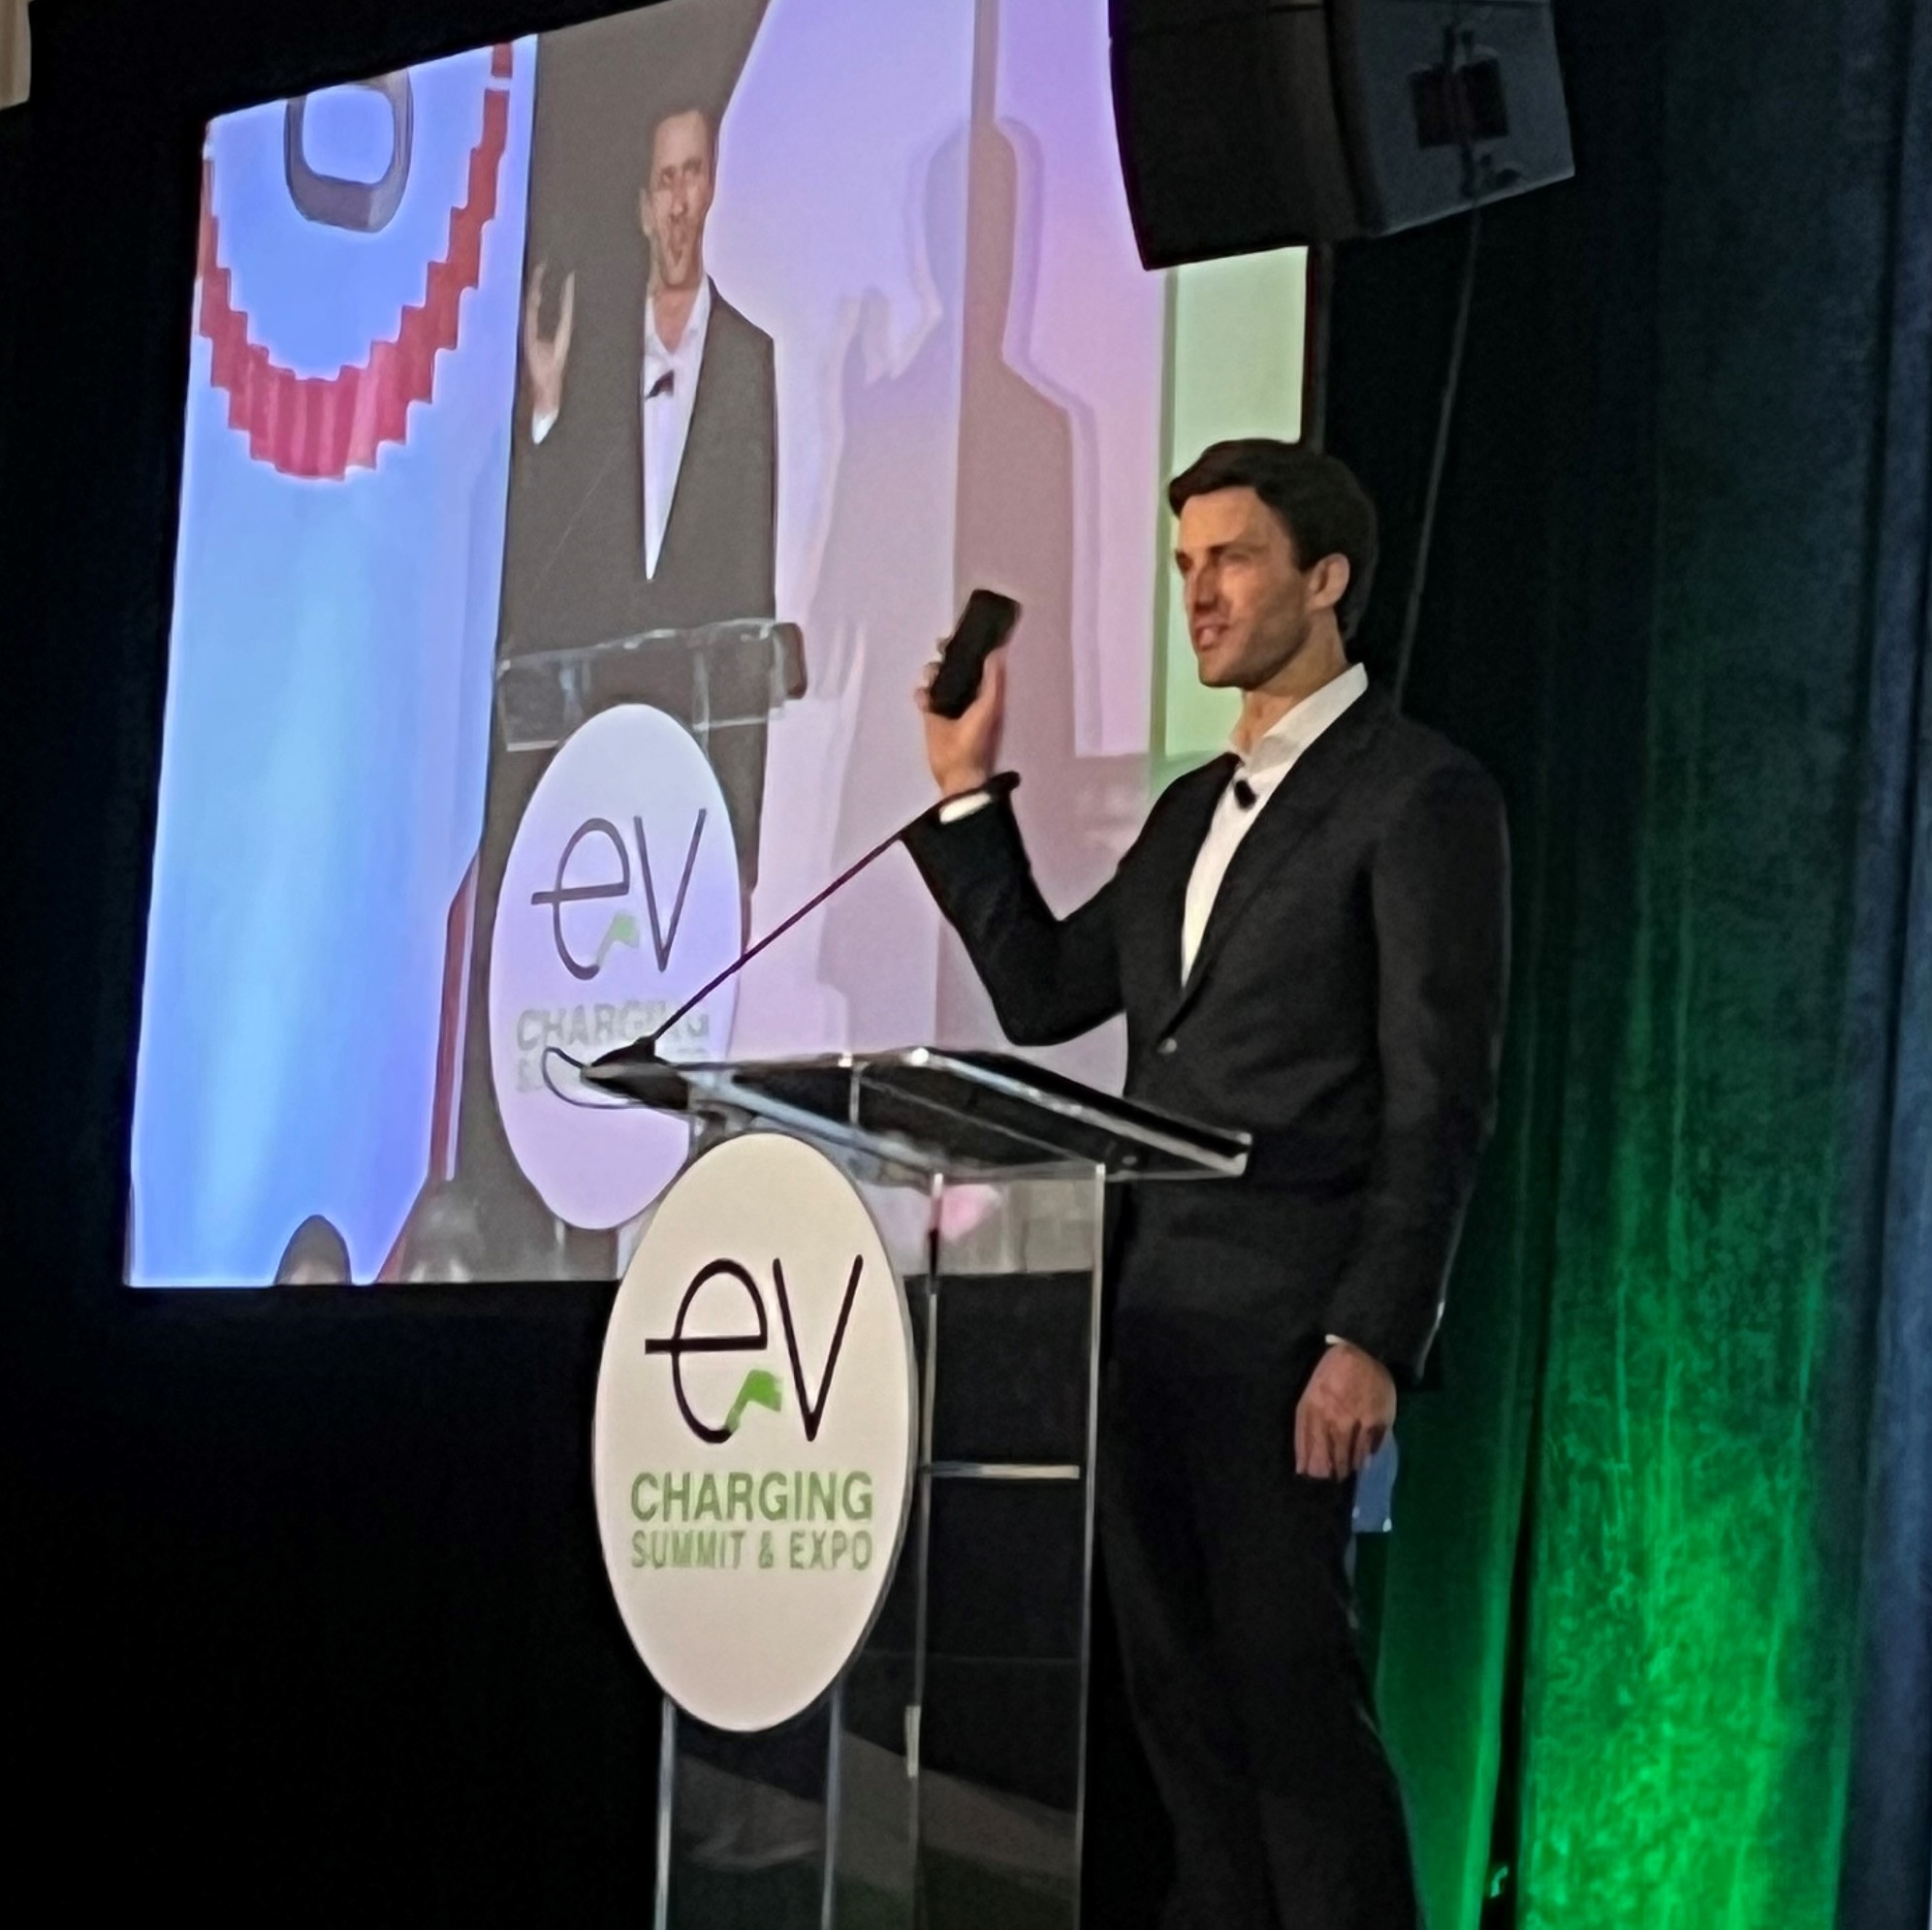 Andrew Cornelia told the audience at the EV Charging Summit & Expo that Mercedes-Benz has invested US$1bn in building its North American charging network